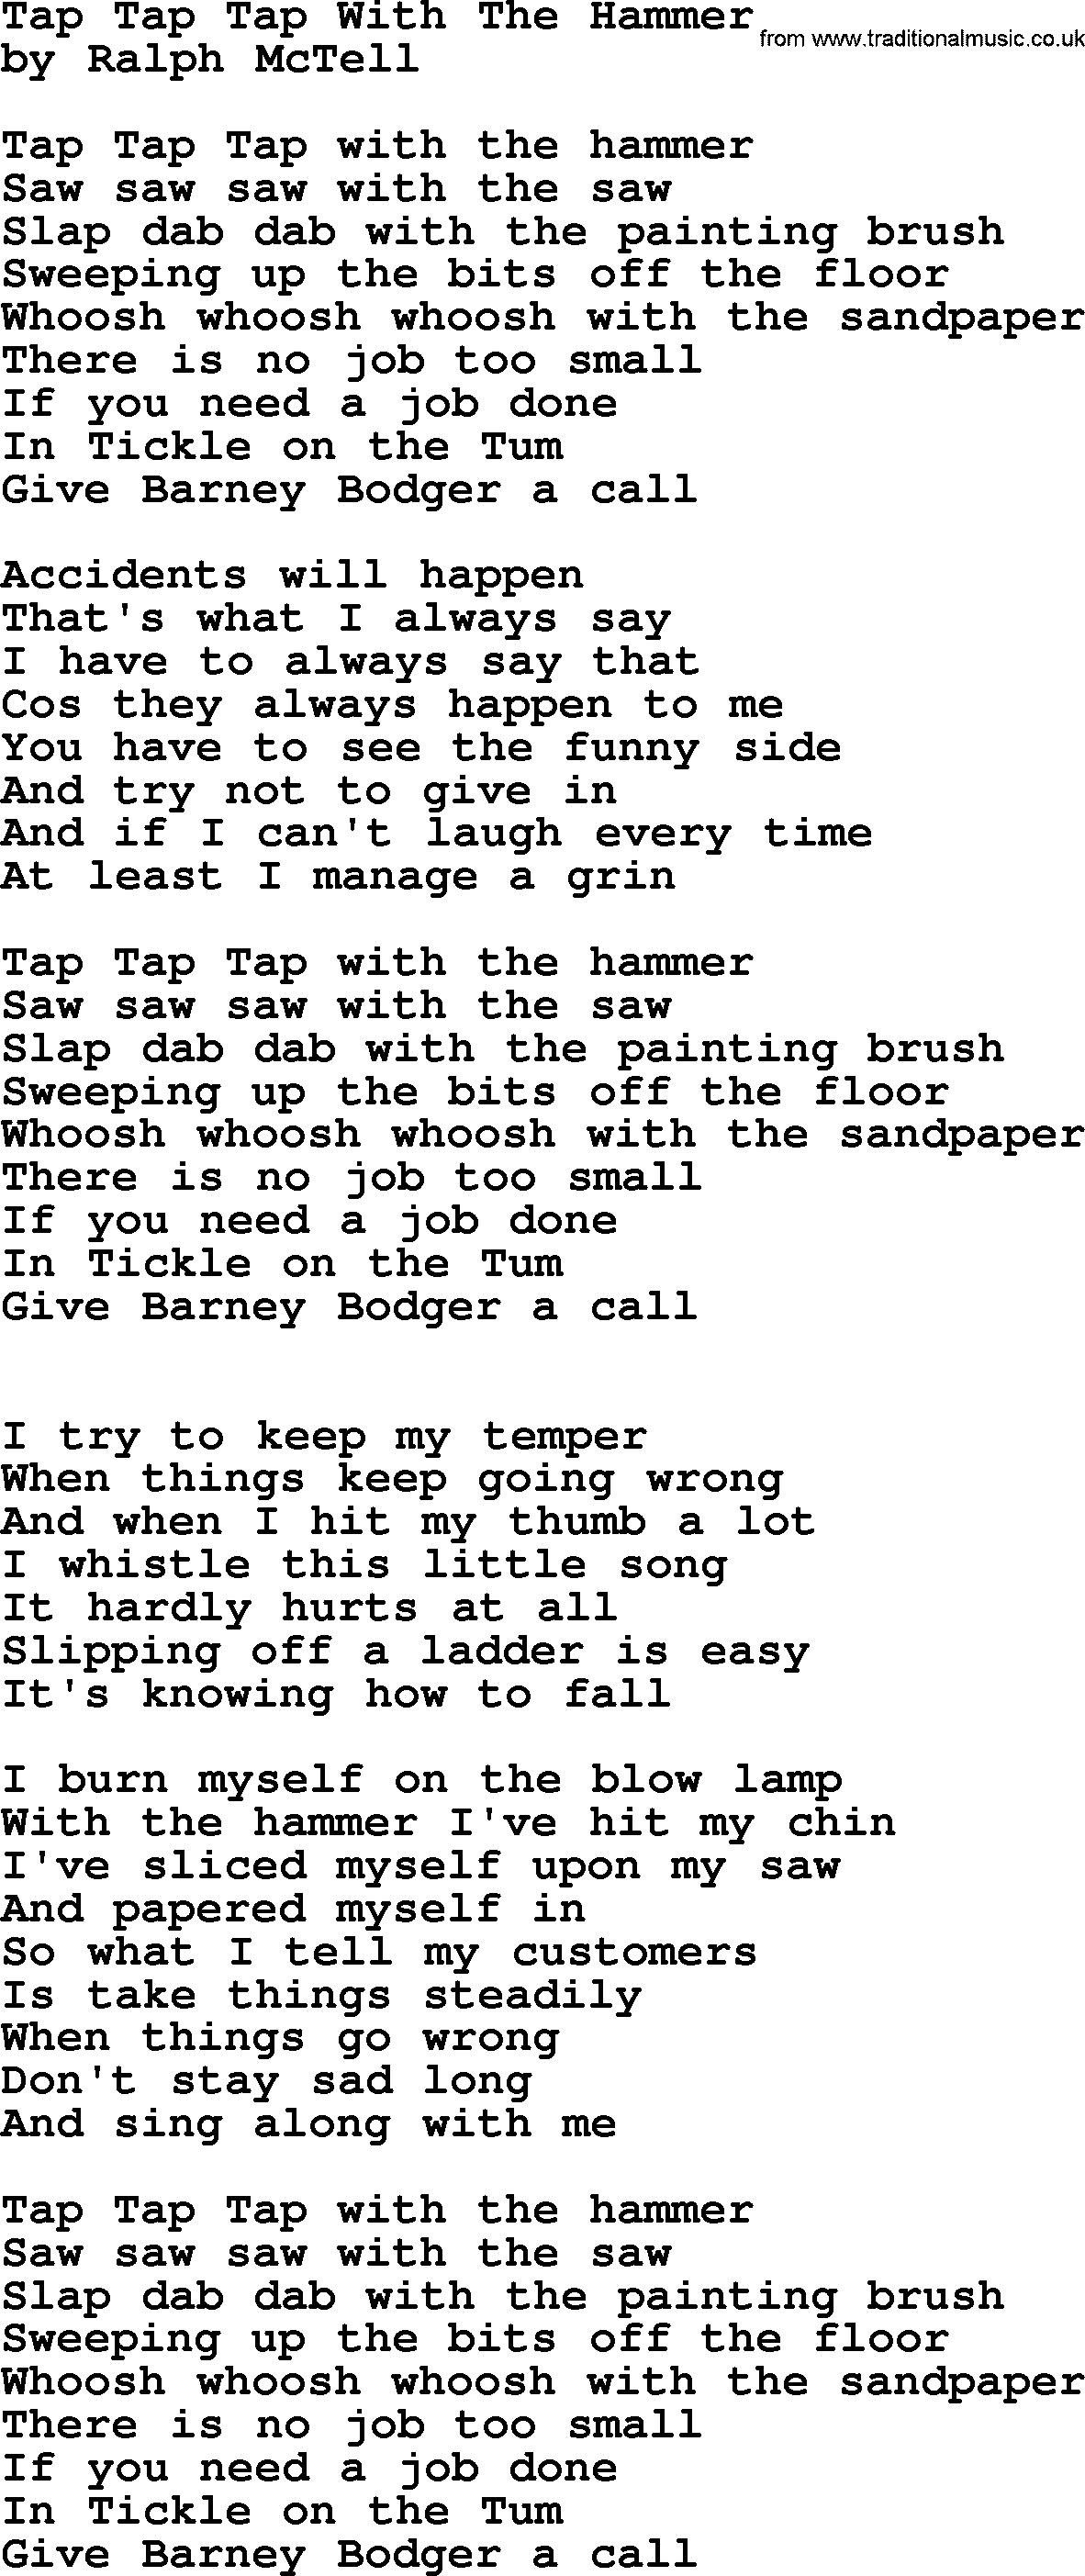 Ralph McTell Song: Tap Tap Tap With The Hammer, lyrics